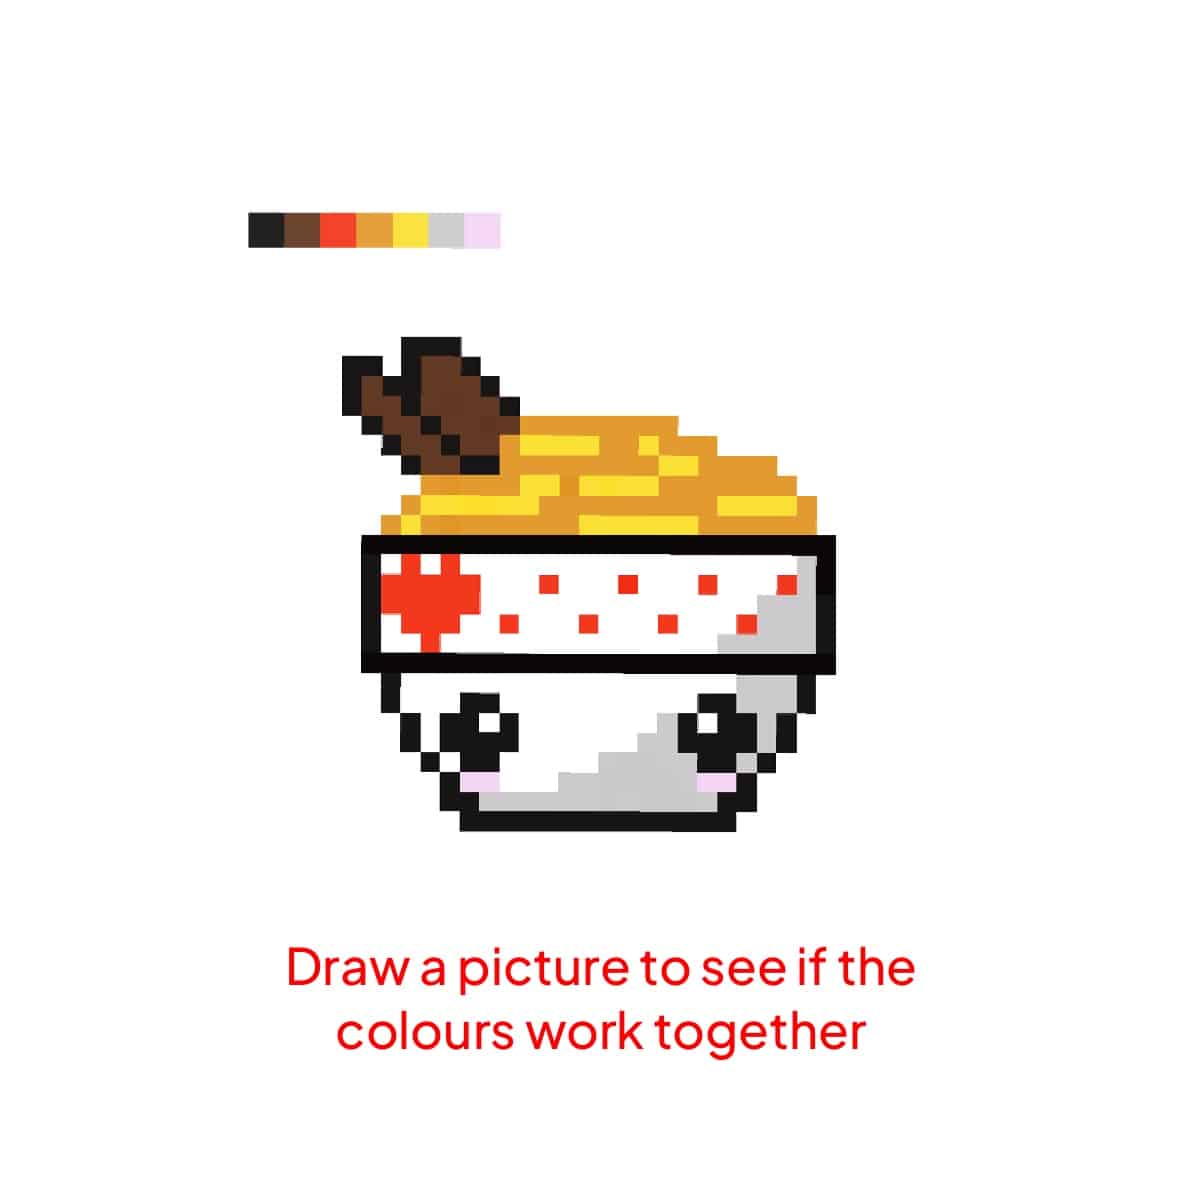 How To Choose Color Palette For Pixel Art?